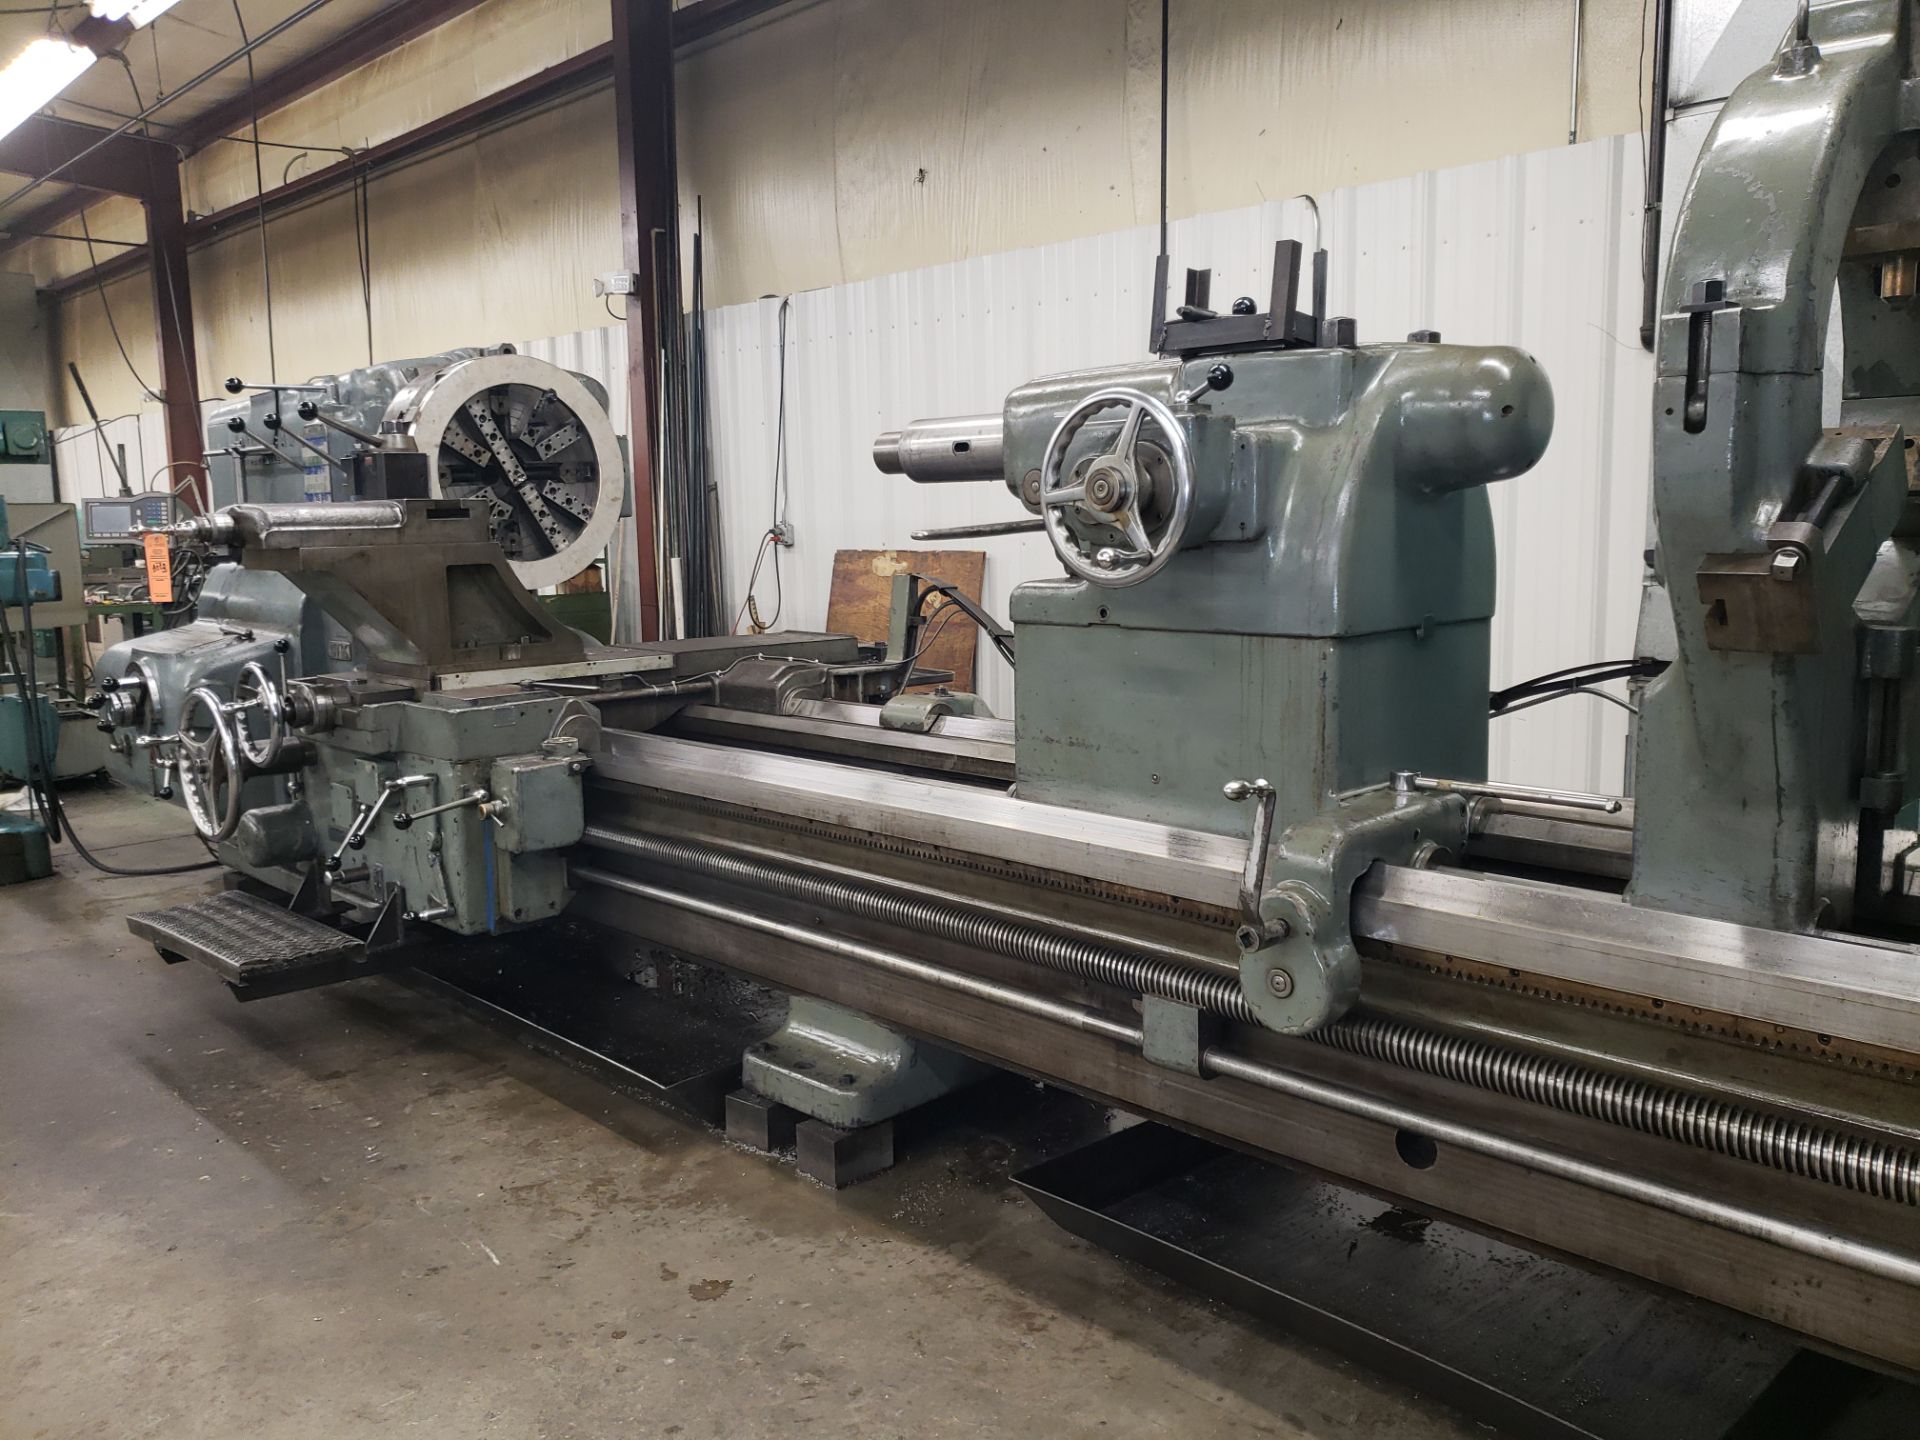 AMERICAN PACEMAKER U-9 LATHE 40 X 156 40 HP ACU-RITE DRO M-2XG PALLET OF TOOLING FACE PLATE (LOCATED